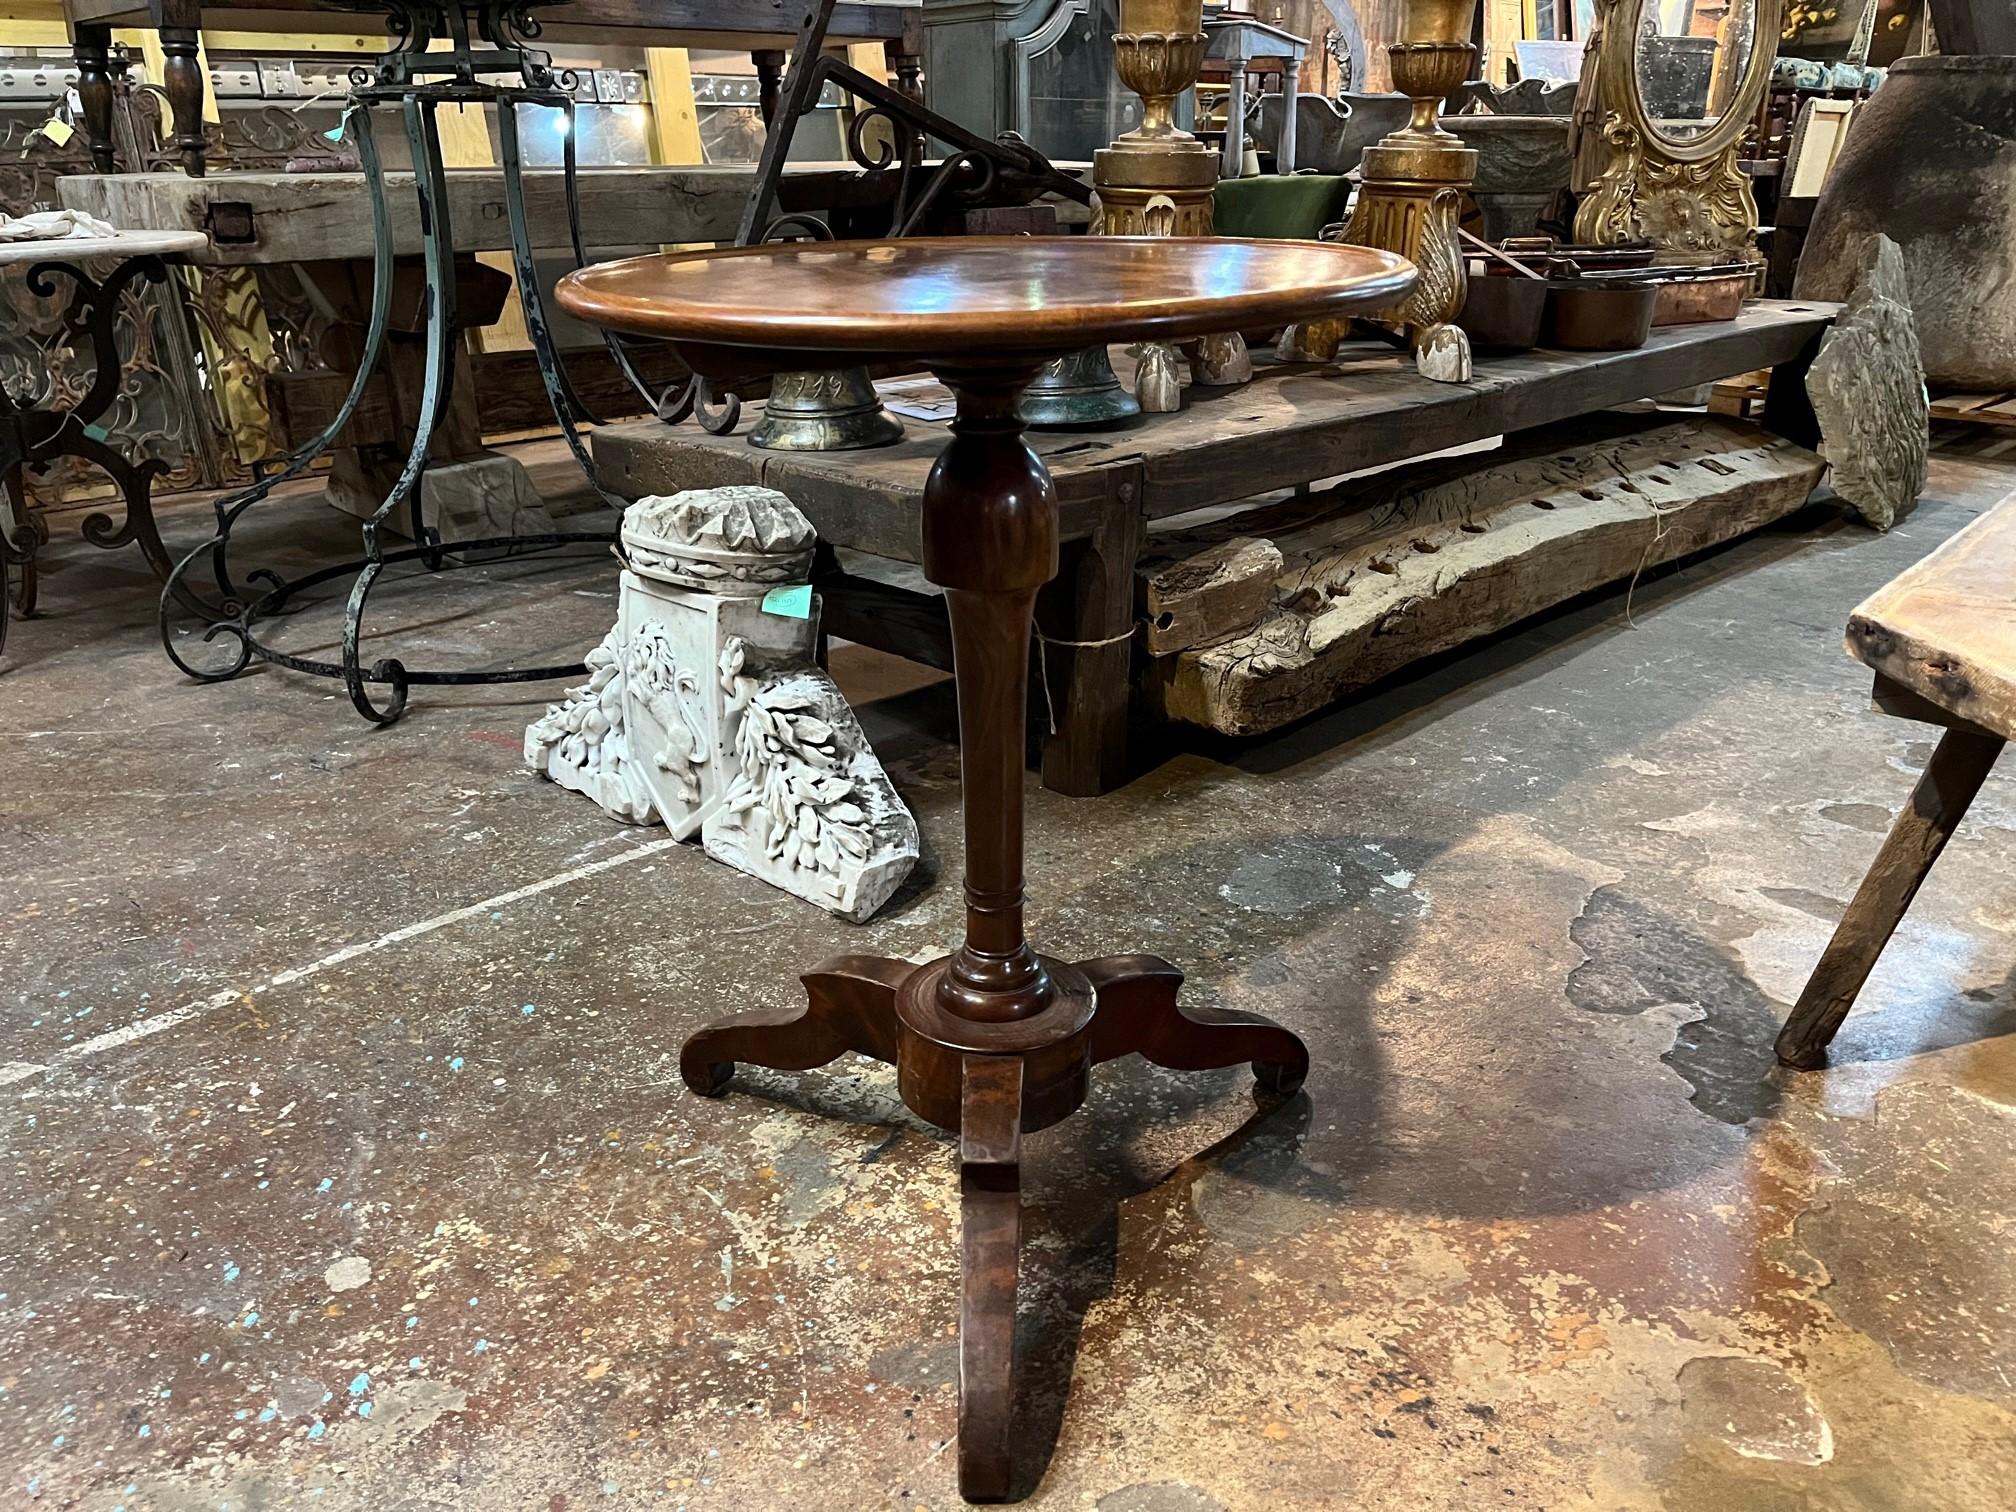 A very lovely later 19th century Louis Philippe Gueridon style in fruitwood from the South of France. Handsomely constructed with a baluster shape pedestal and tripod legs. Wonderful tone and patina.